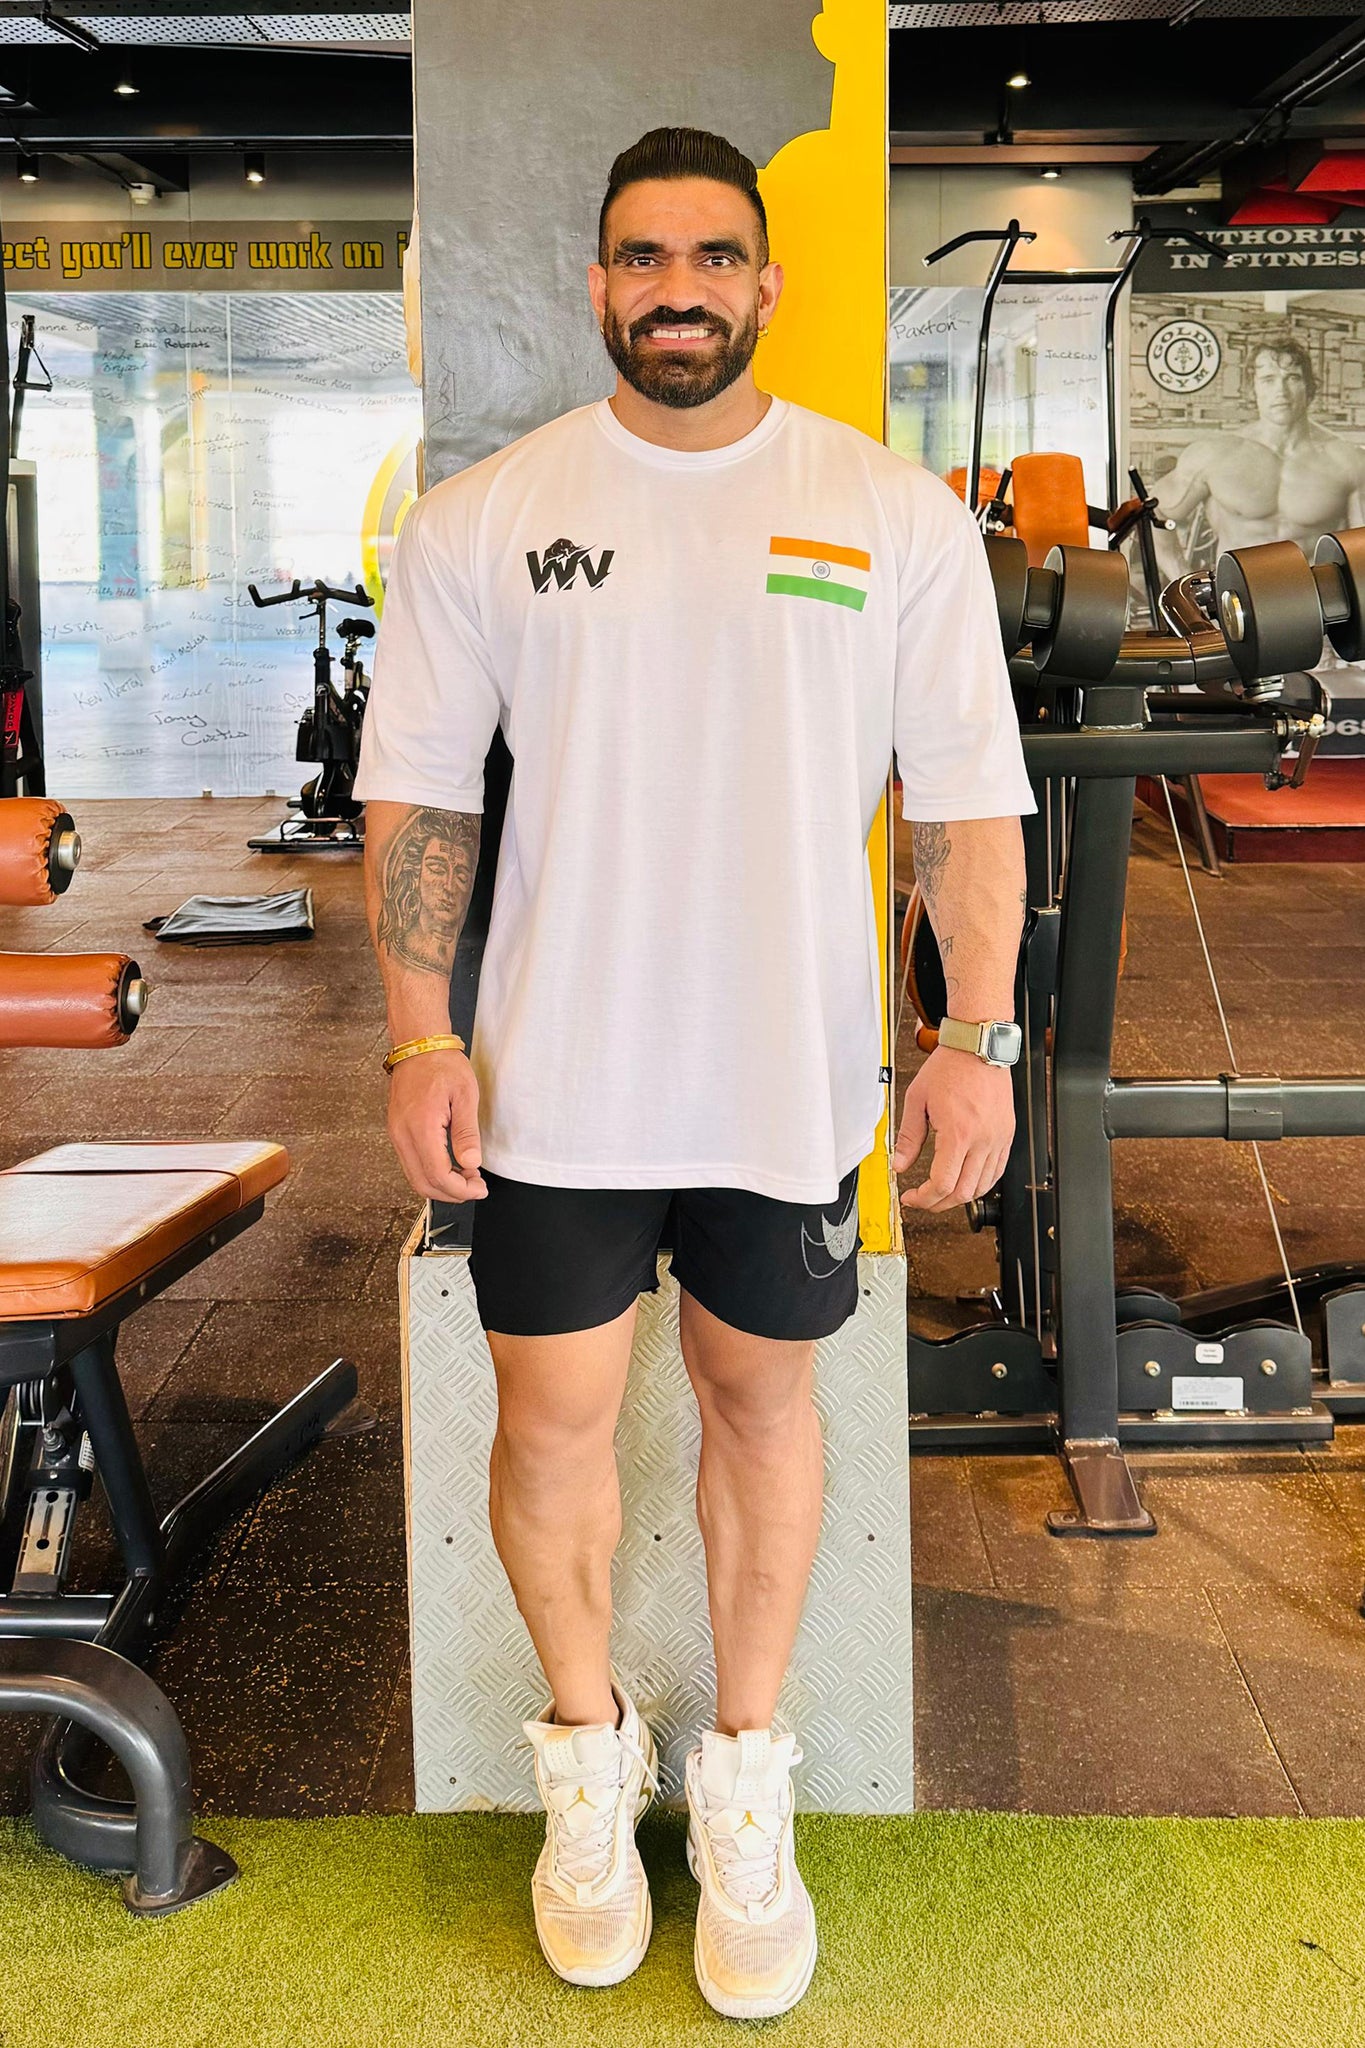 OFFICIAL INDIA SPORTS ATHLETE OVERSIZED T-SHIRT (WHITE)